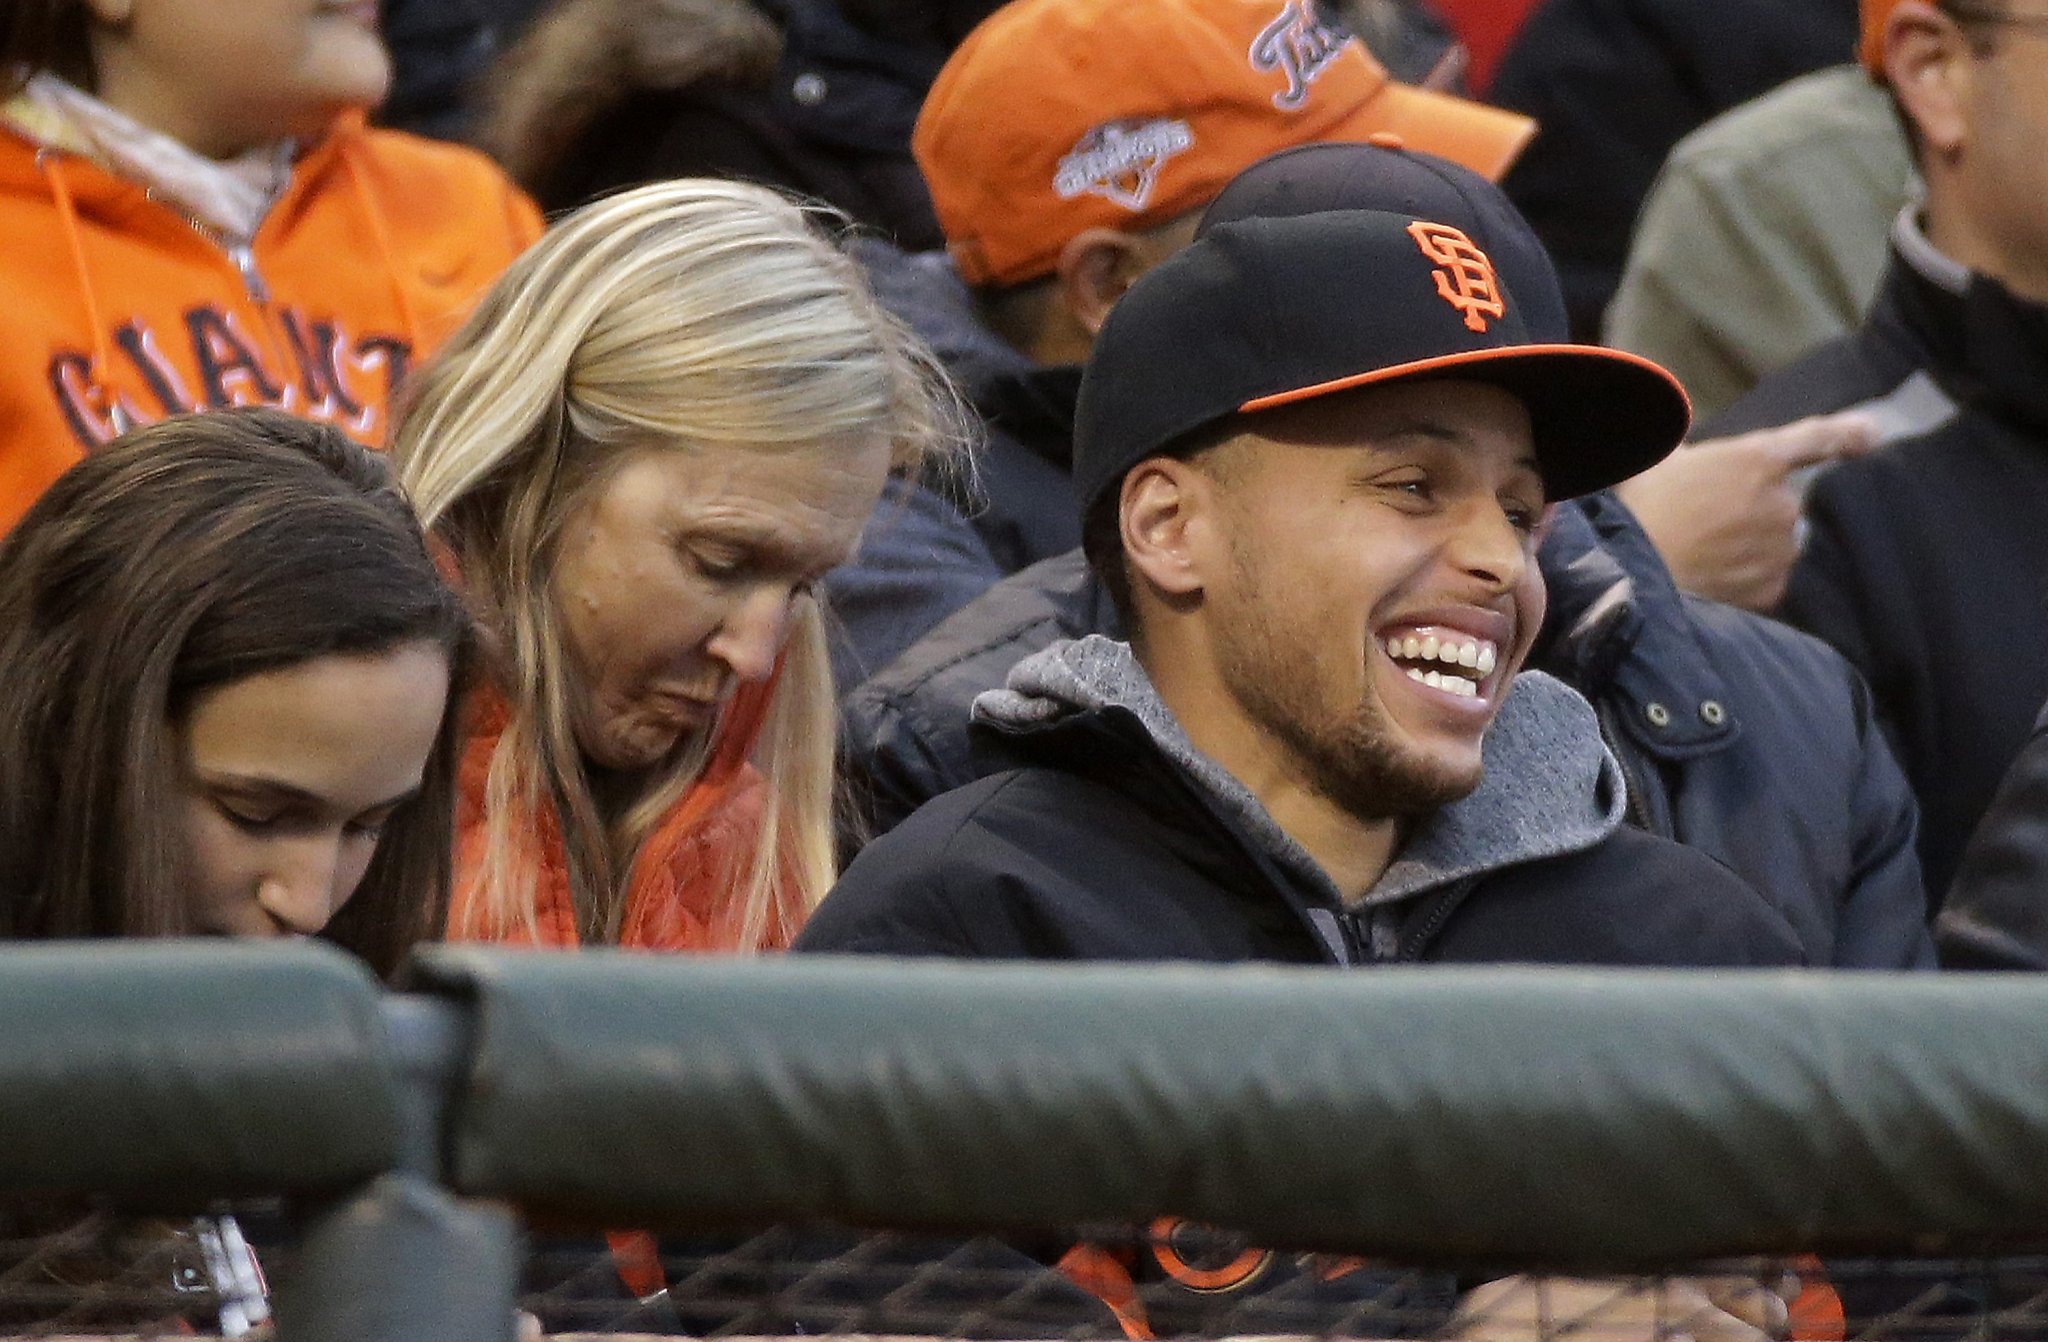 Giants or A's? Curry says his real team is  neither